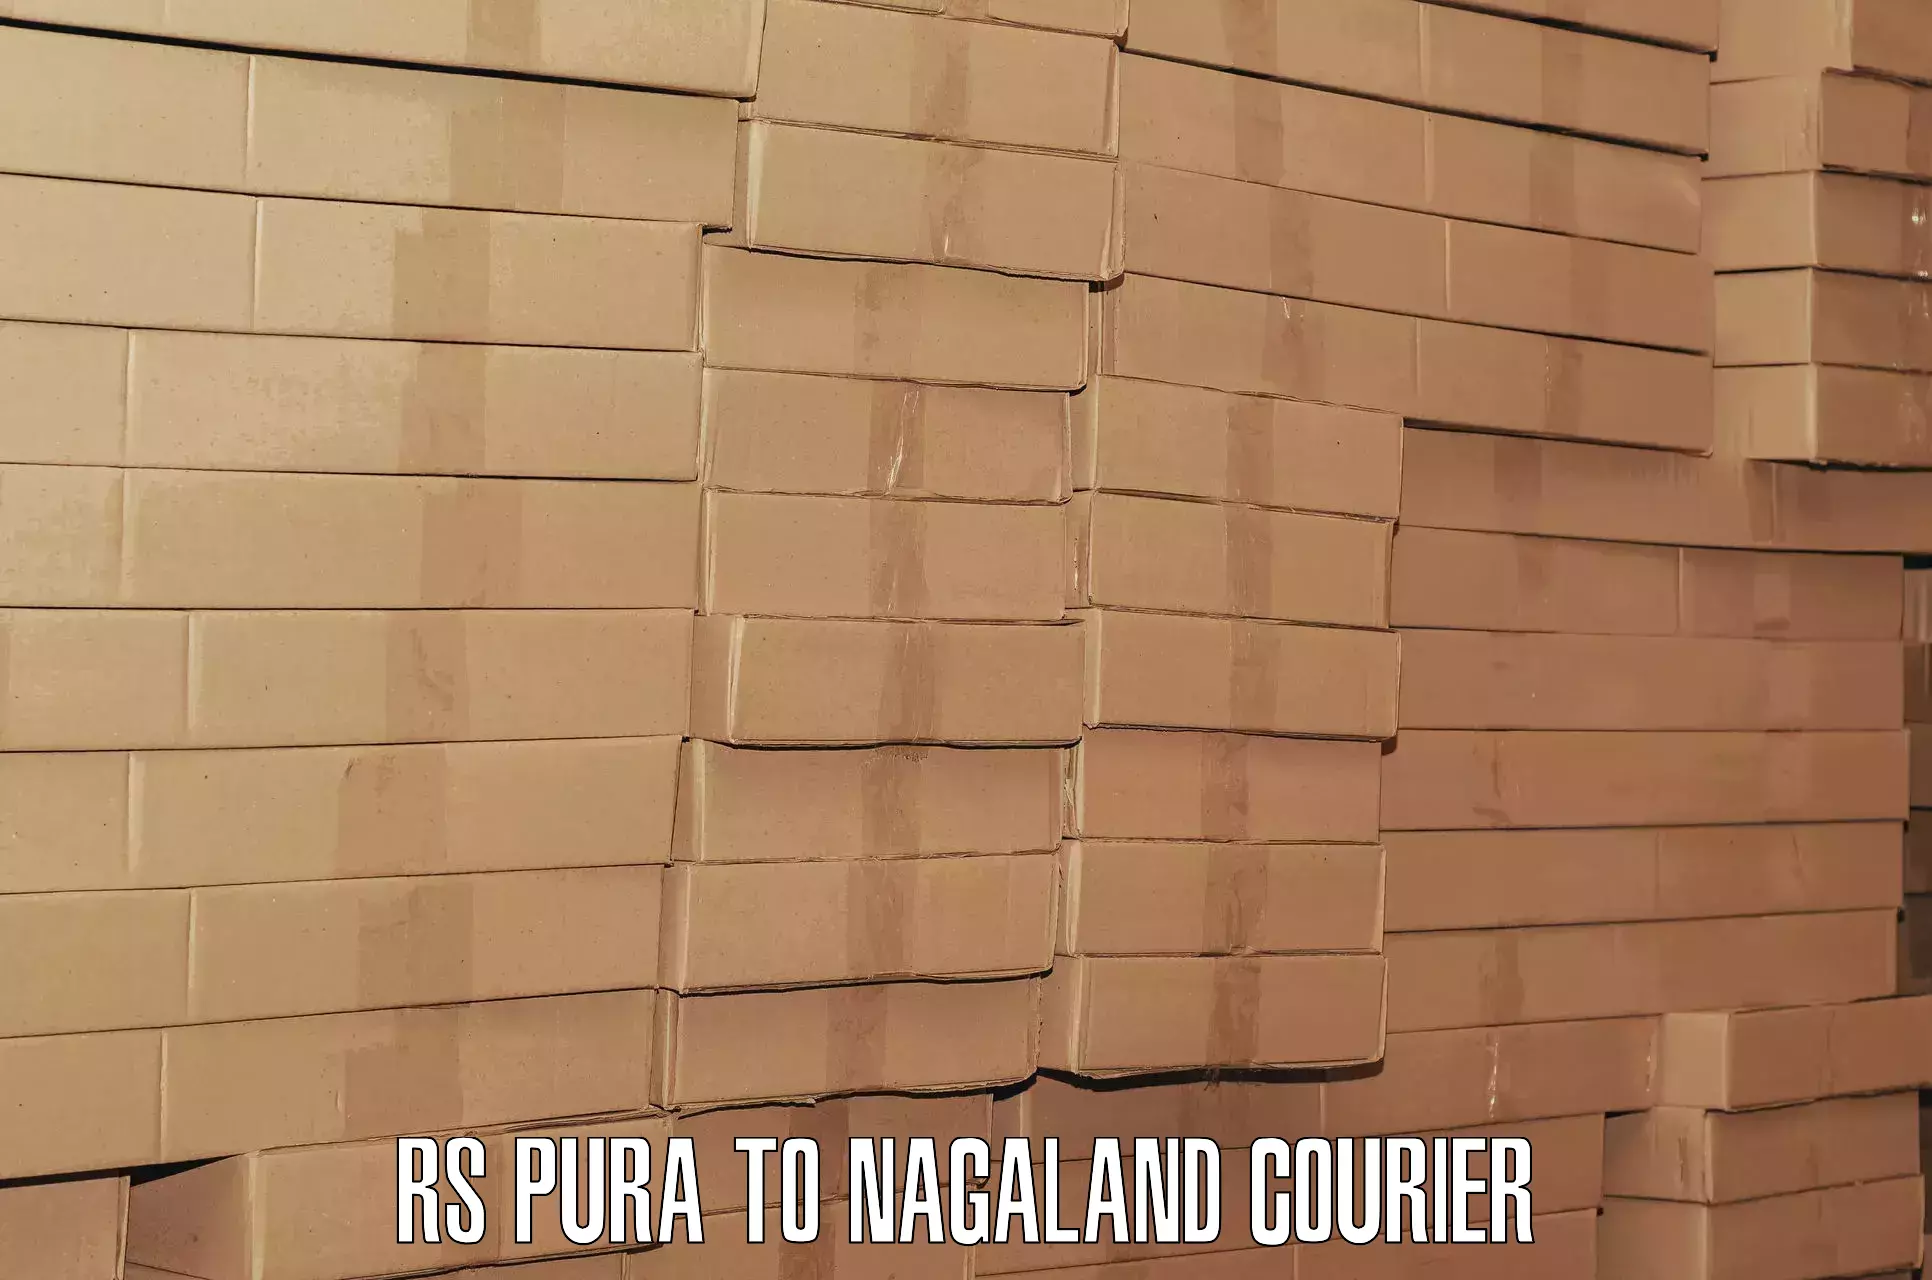 Express luggage delivery RS Pura to Nagaland